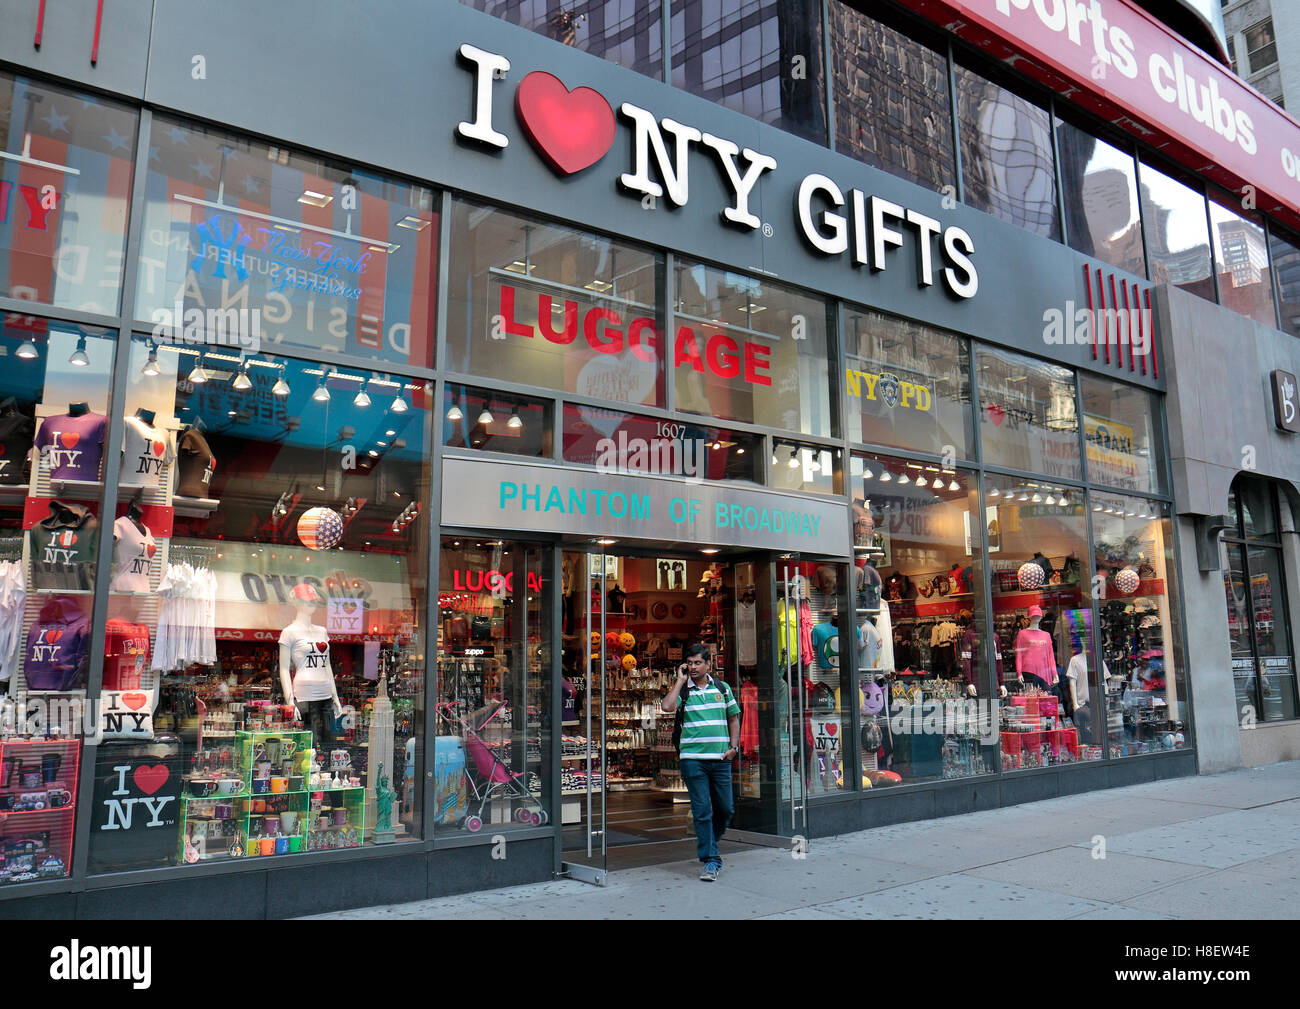 The "I Love NY Gifts" shop on Times Square, Manhattan, New York City